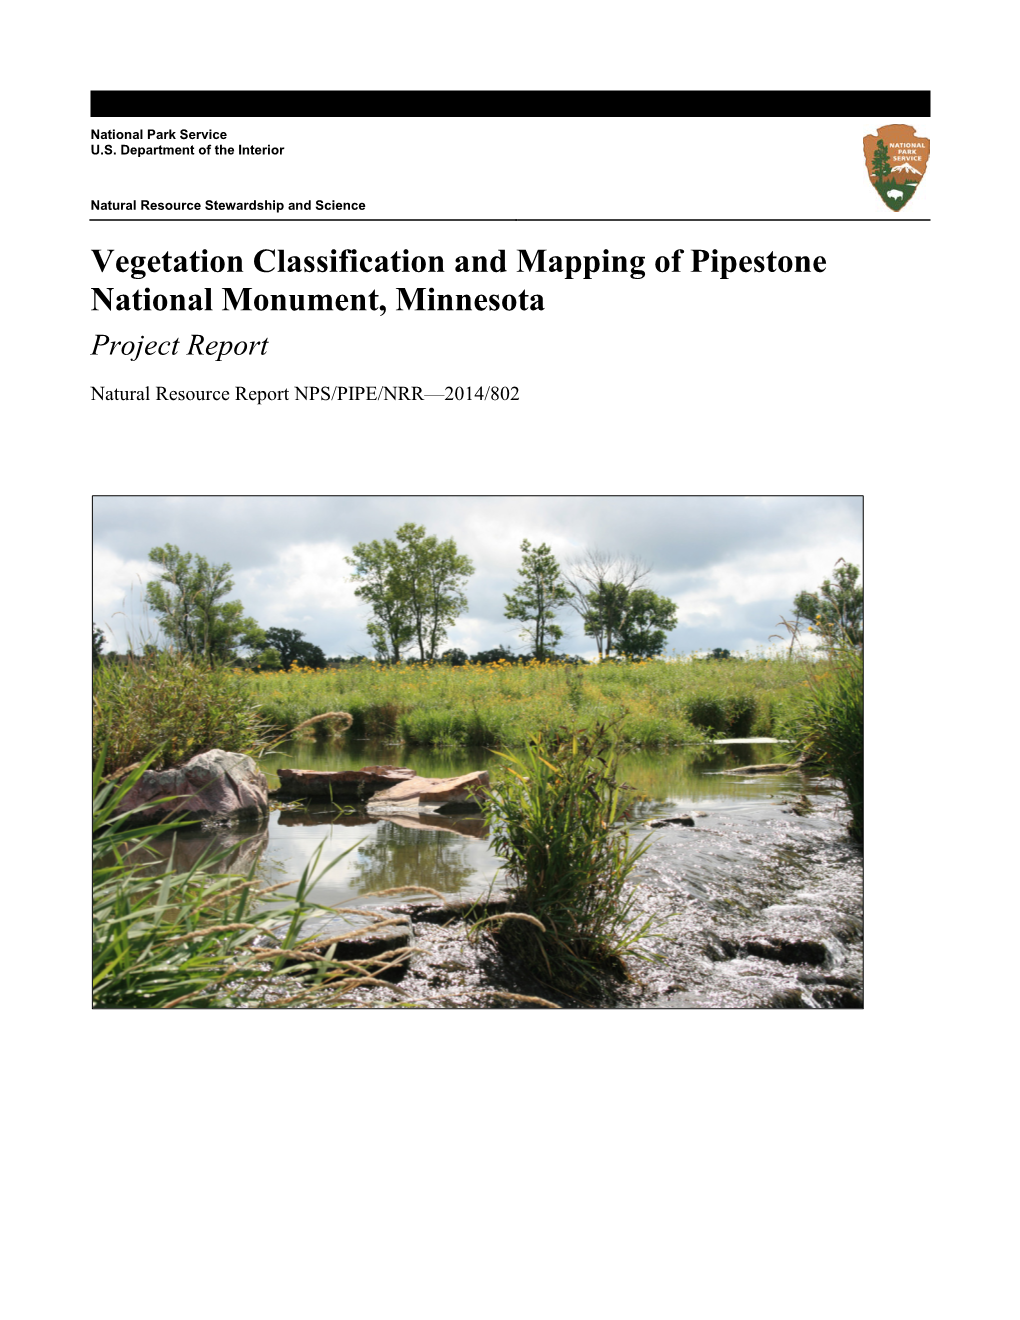 Vegetation Classification and Mapping of Pipestone National Monument, Minnesota Project Report